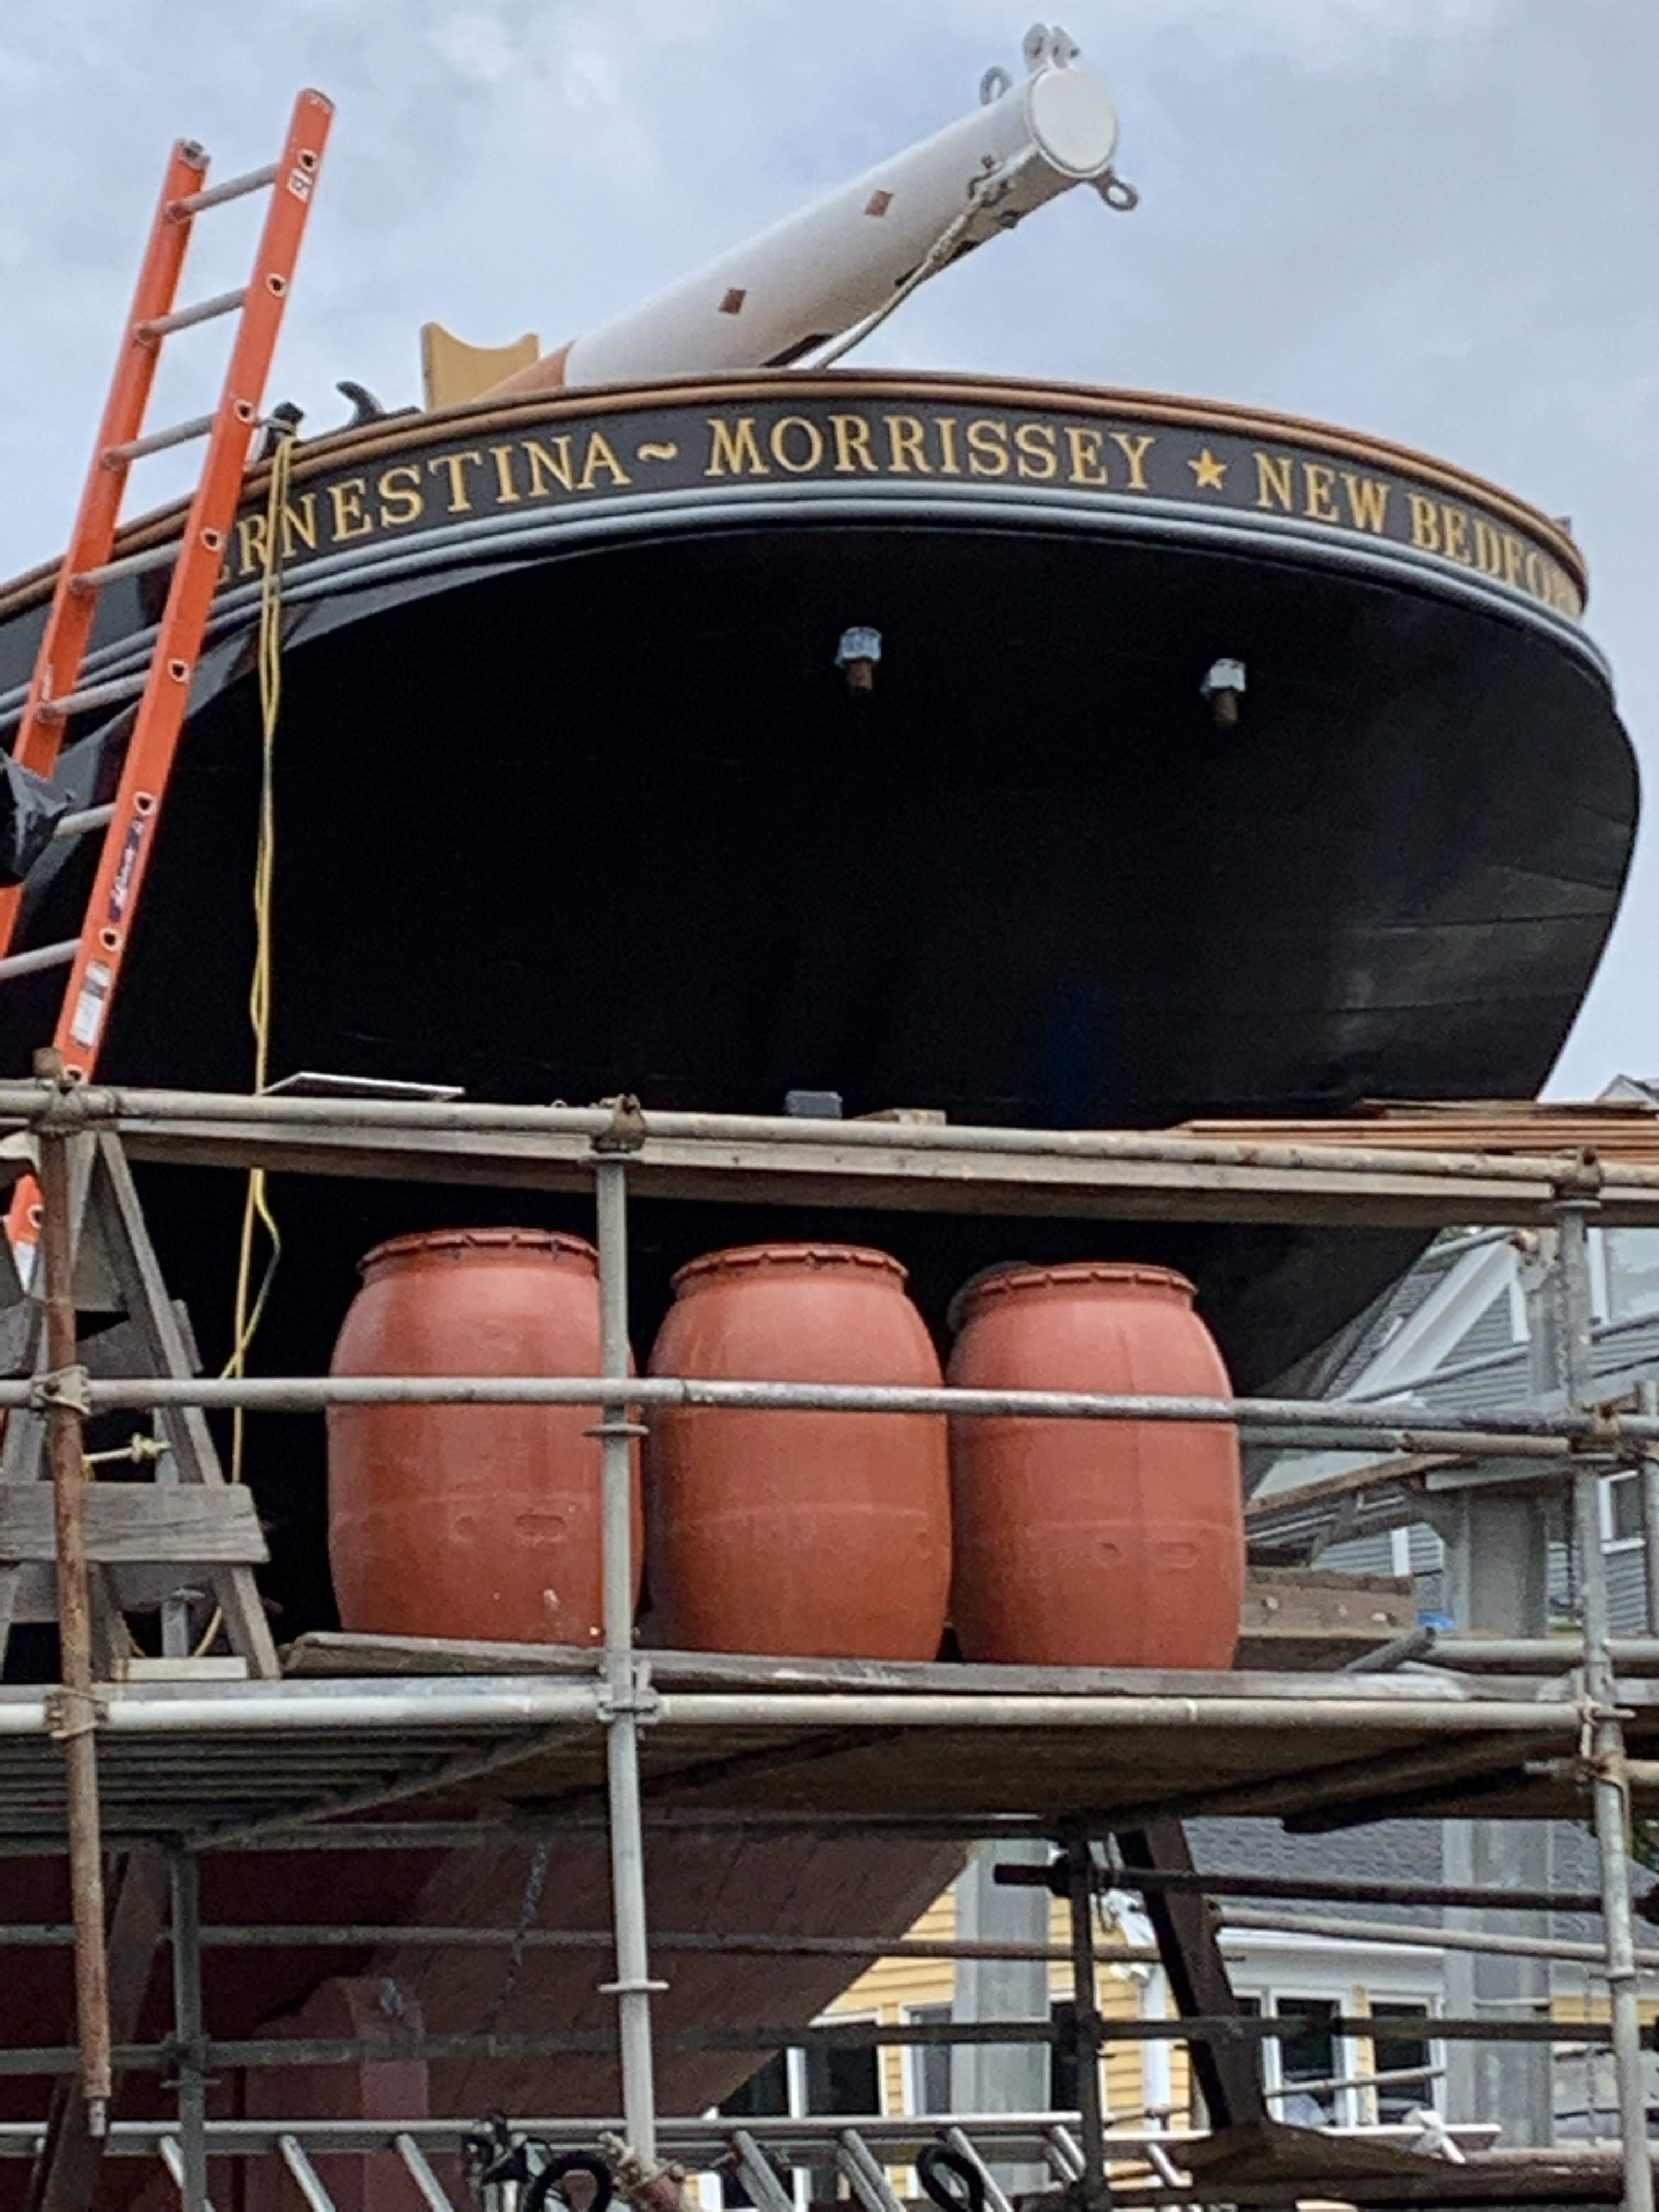 Ernestina-Morrissey is not ready yet but soon she will be sailing the waters of Buzzards Bay proudly returning to her homeport, New Bedford!   And in teh Spring of 2023, sailing to Commonwealth ports and some of the other waters she has known. under the careful stewardship of Massachusetts Maritime Academy!